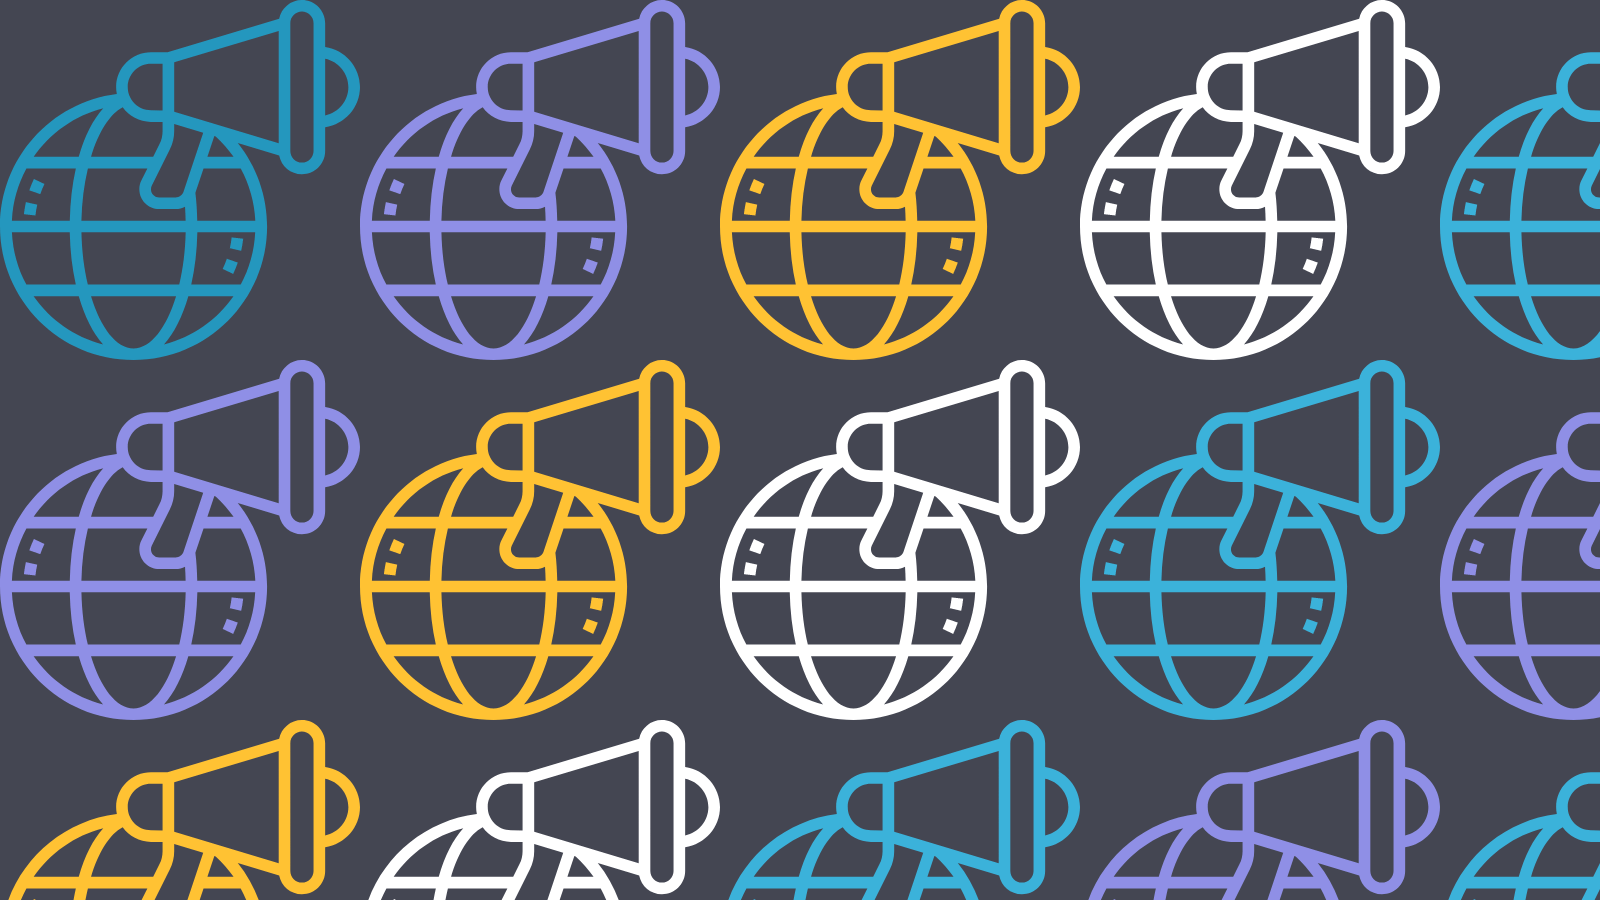 A repeating pattern of a graphic with a megaphone over a globe